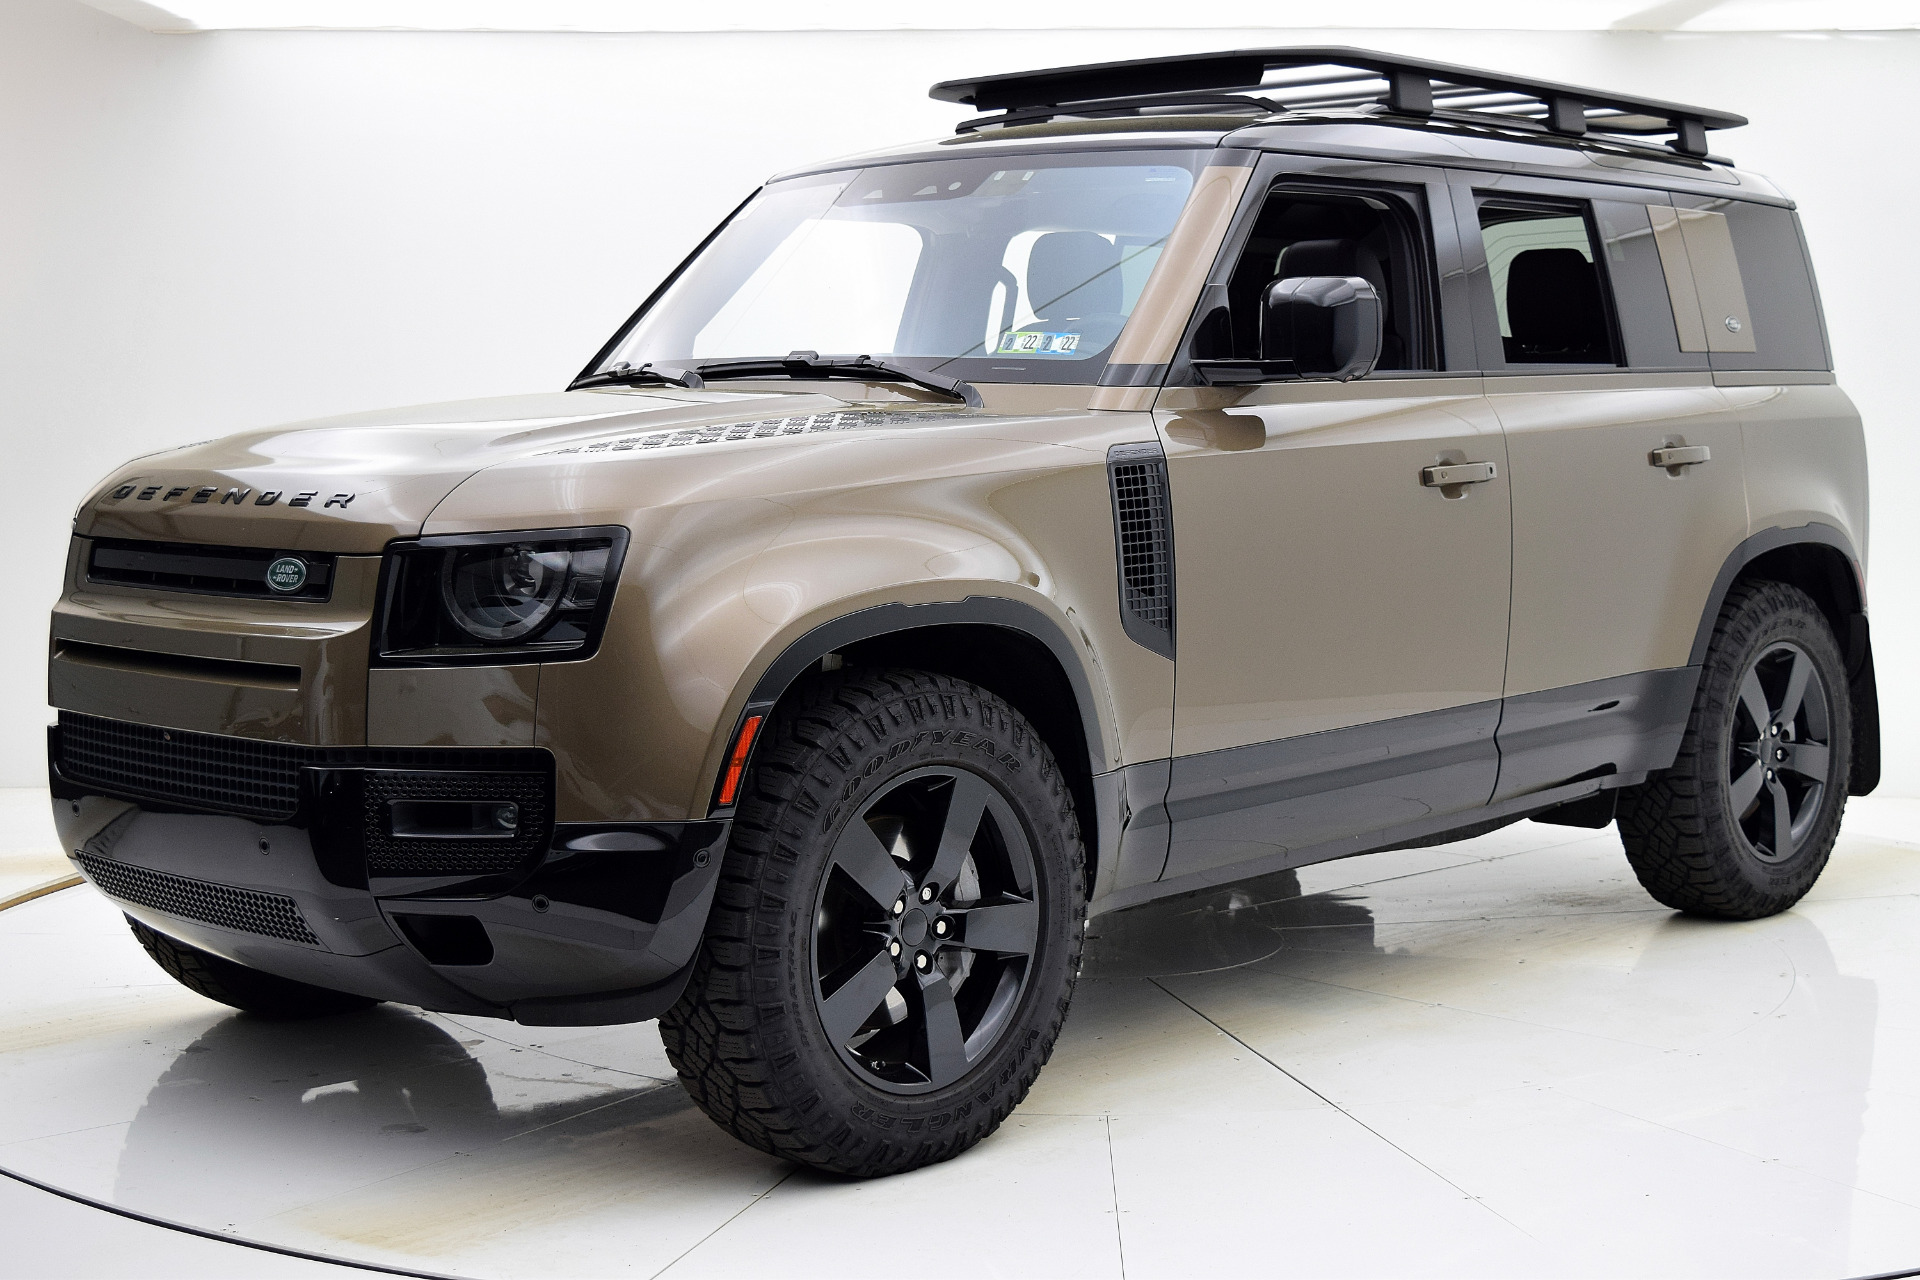 Used 2020 Land Rover Defender First Edition for sale Sold at Bentley Palmyra N.J. in Palmyra NJ 08065 2